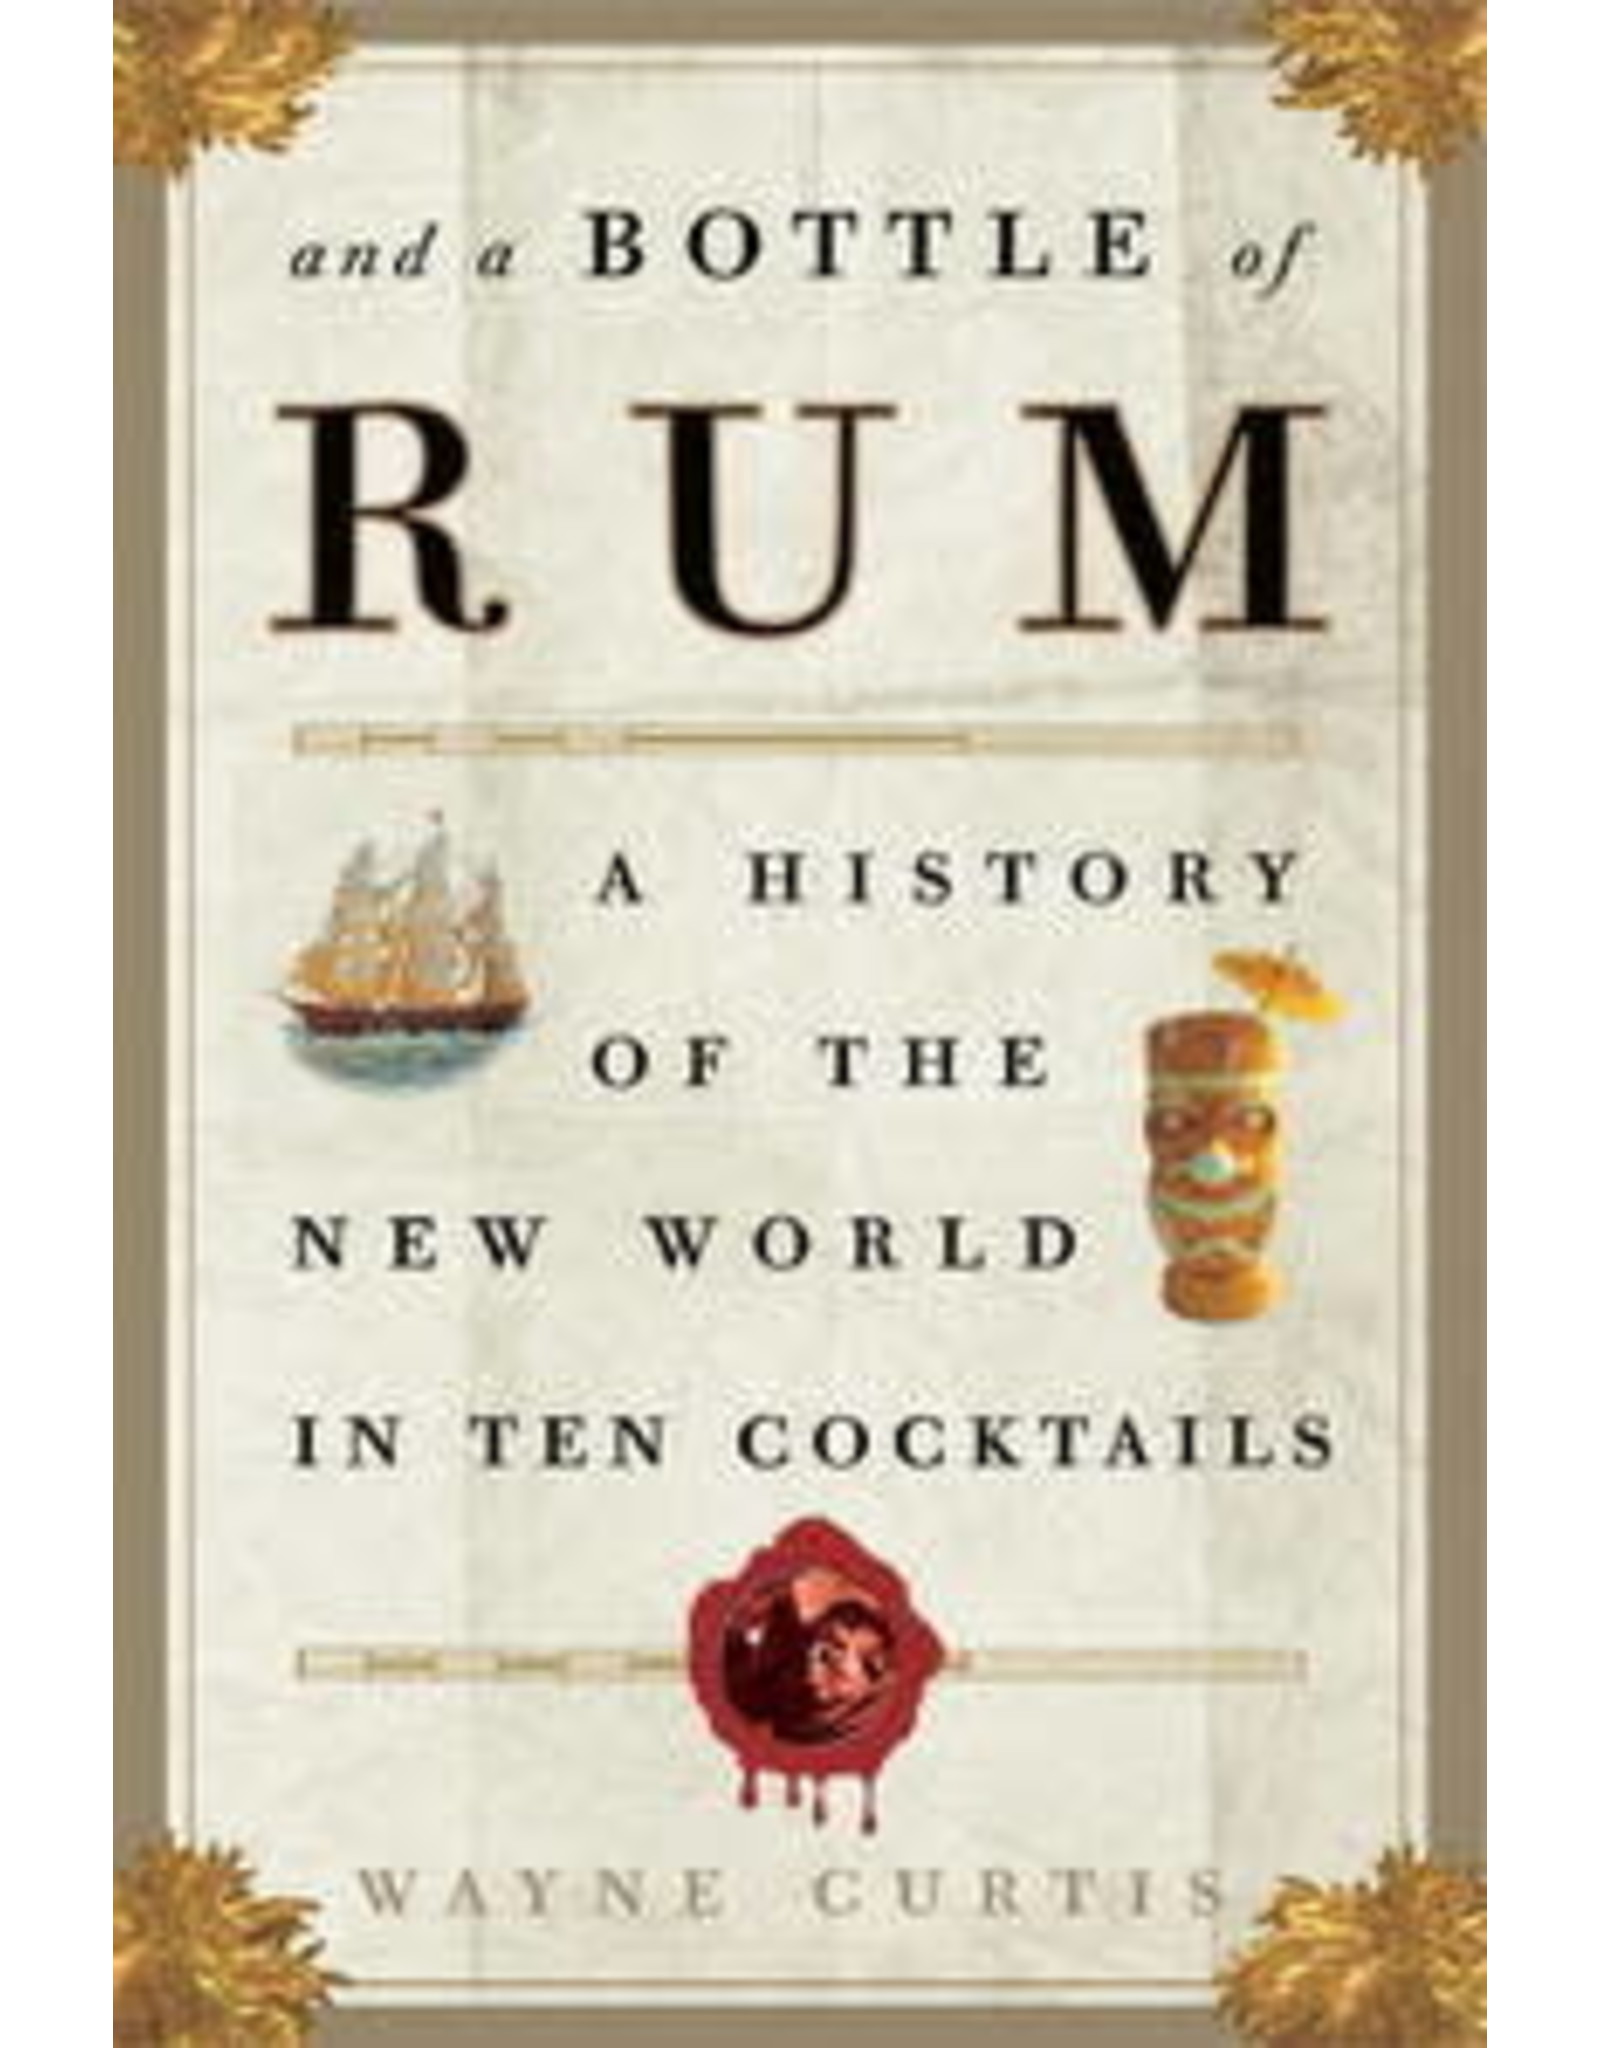 Book, And A Bottle of Rum